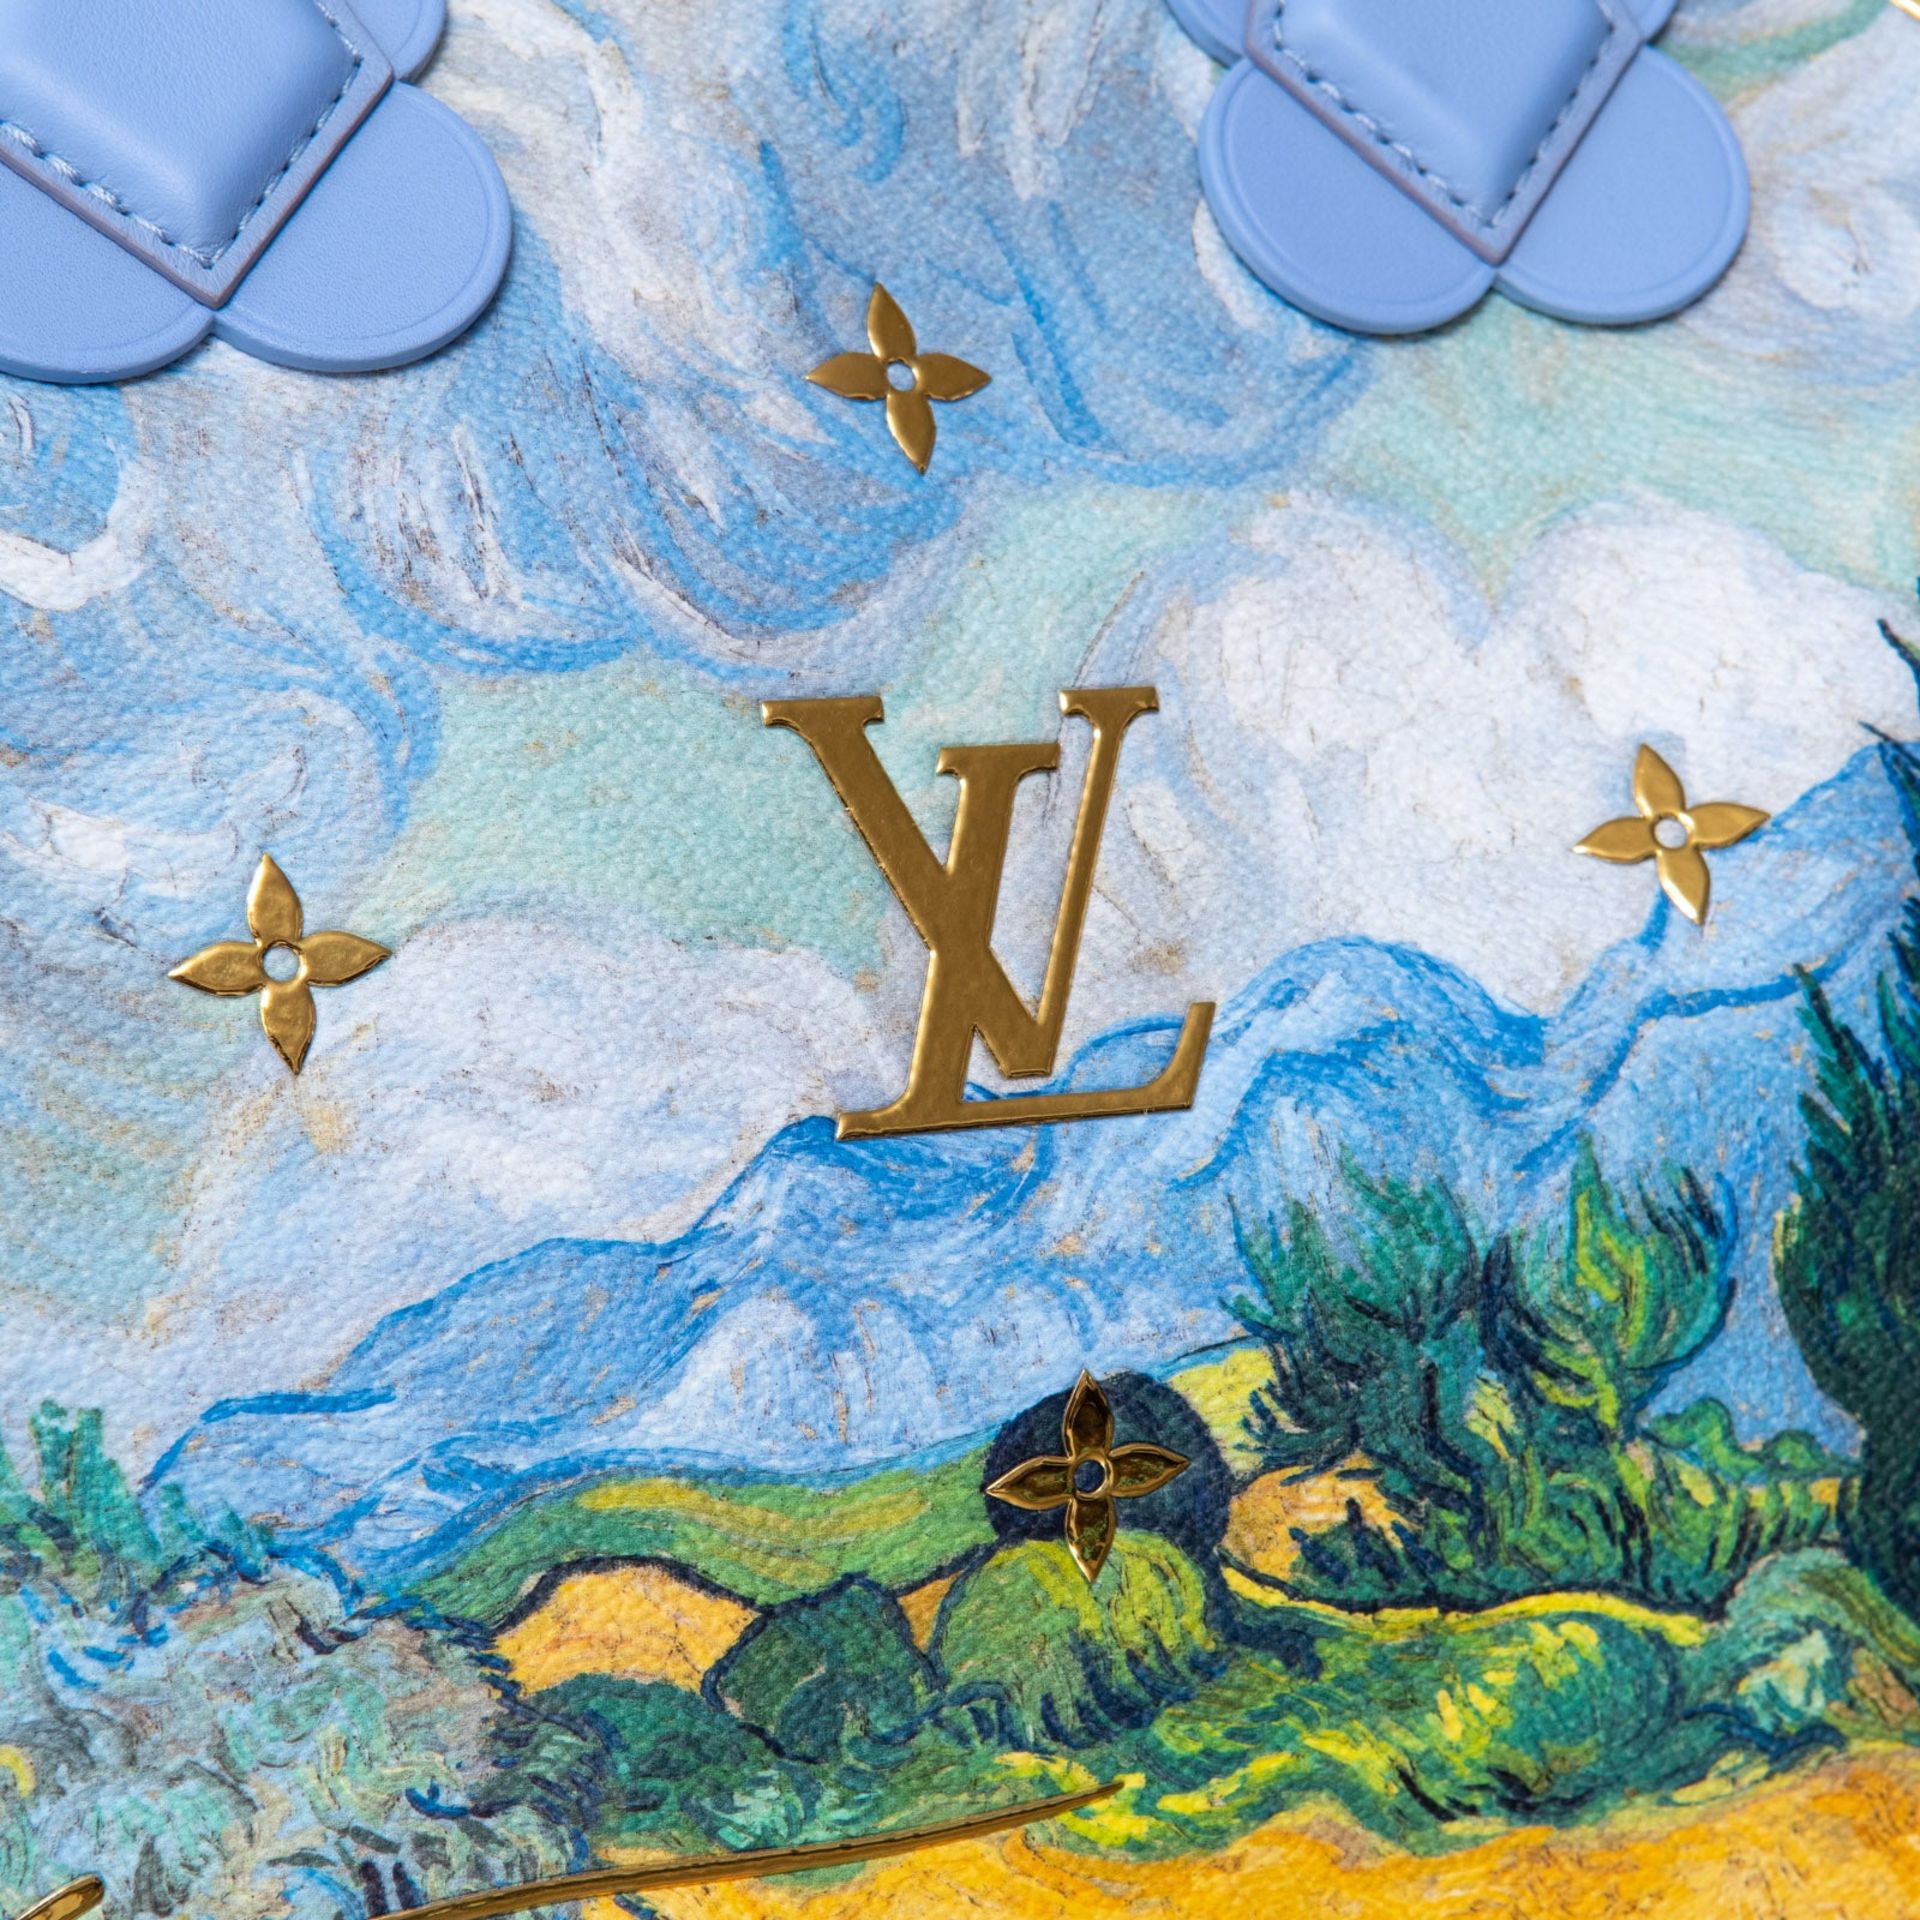 Louis Vuitton Limited Edition Lavender Speedy 30 Jeff Koons Van Gogh Masters Collection - Image 8 of 18